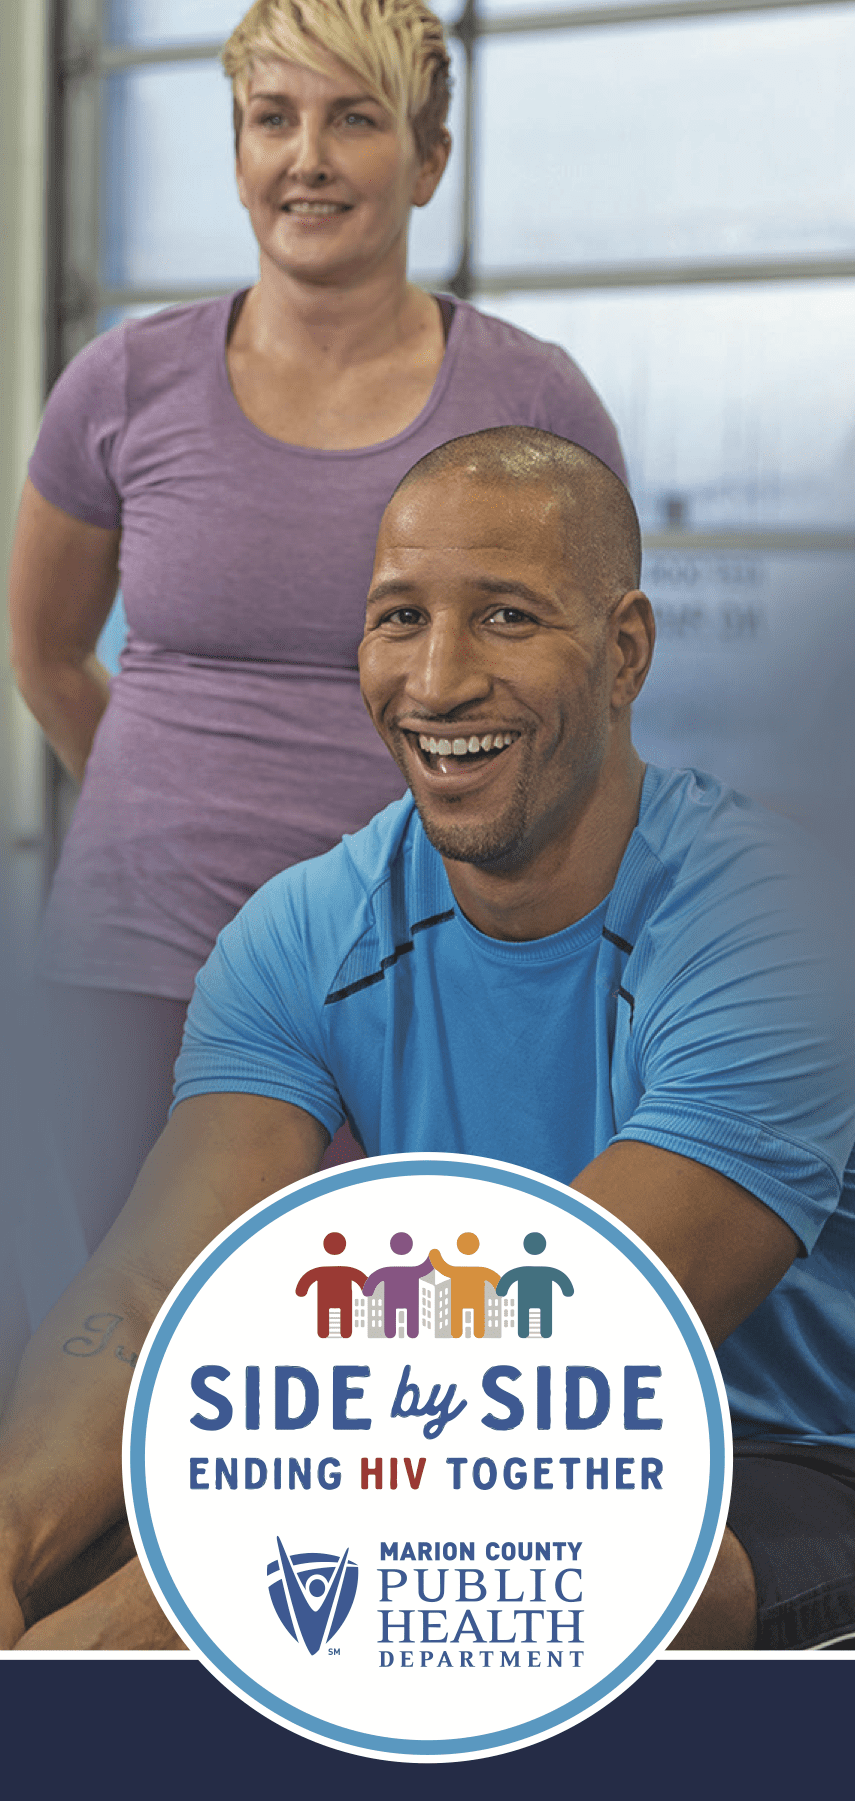 Two individuals working out together and smiling, facing the camera. SIDE by SIDE, Ending HIV Together. Marion County Public Health Department.